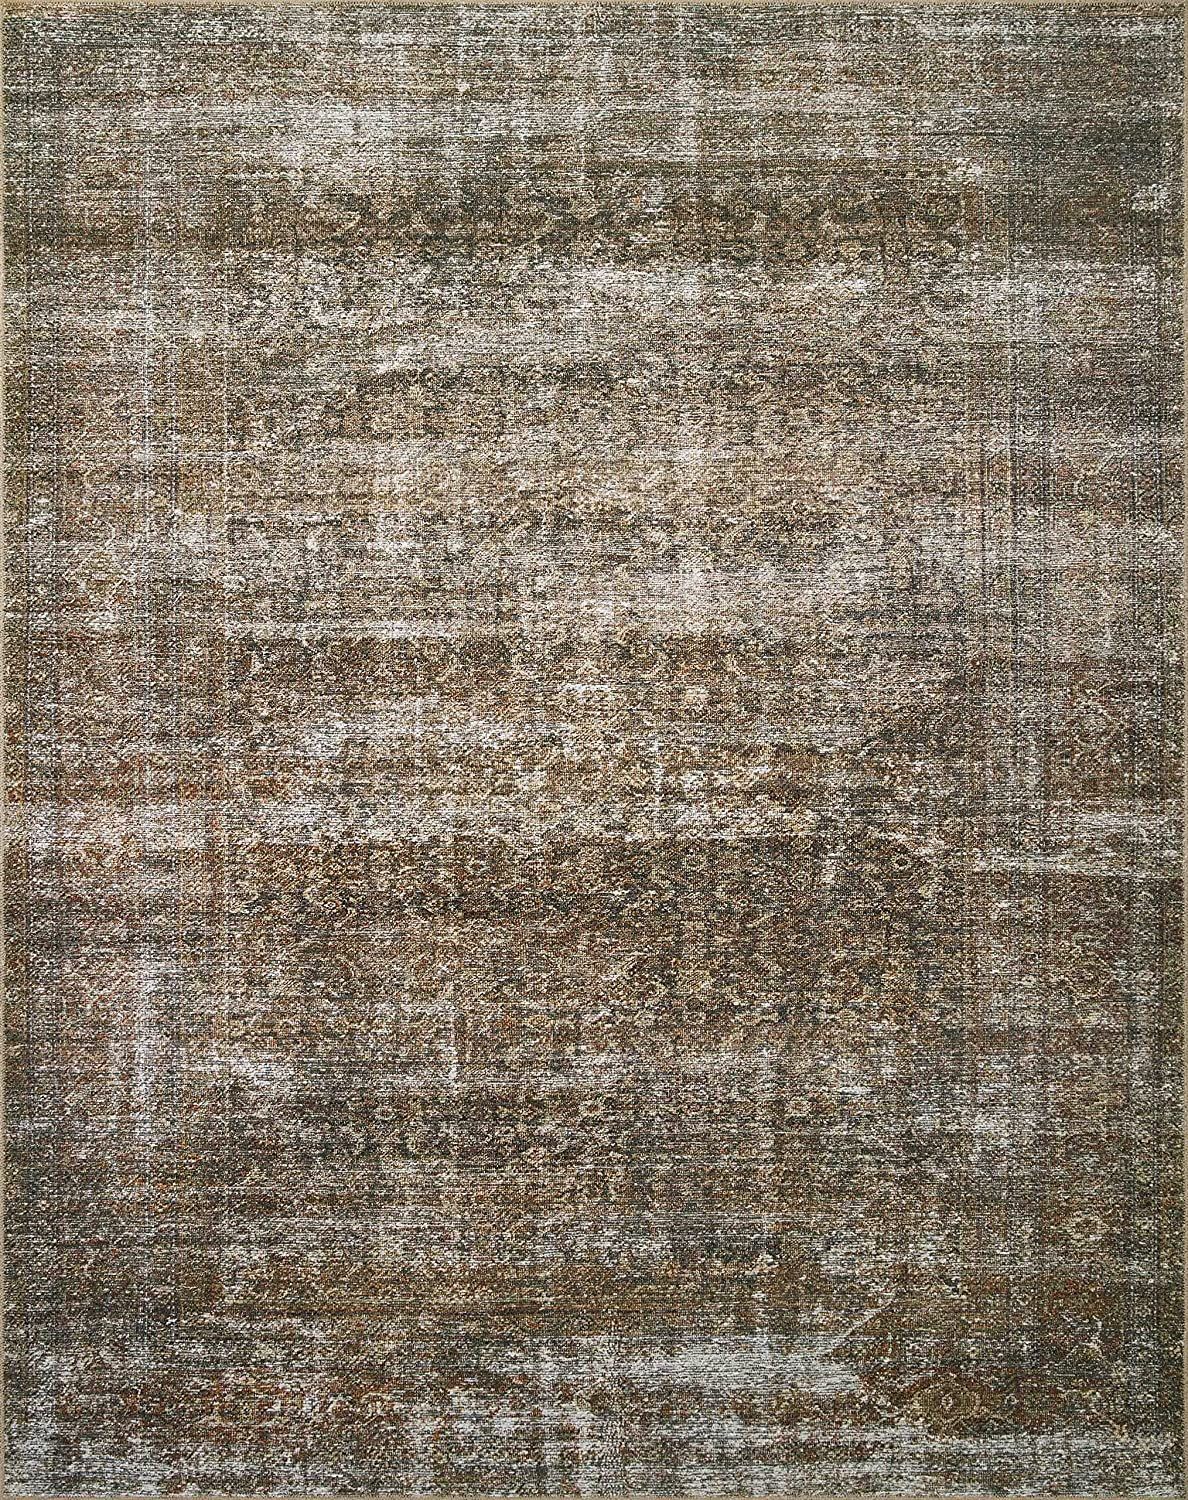 Amber Lewis x Loloi Billie Collection BIL-06 Tobacco / Rust 5' x 7'6" Area Rug | Amazon (US)